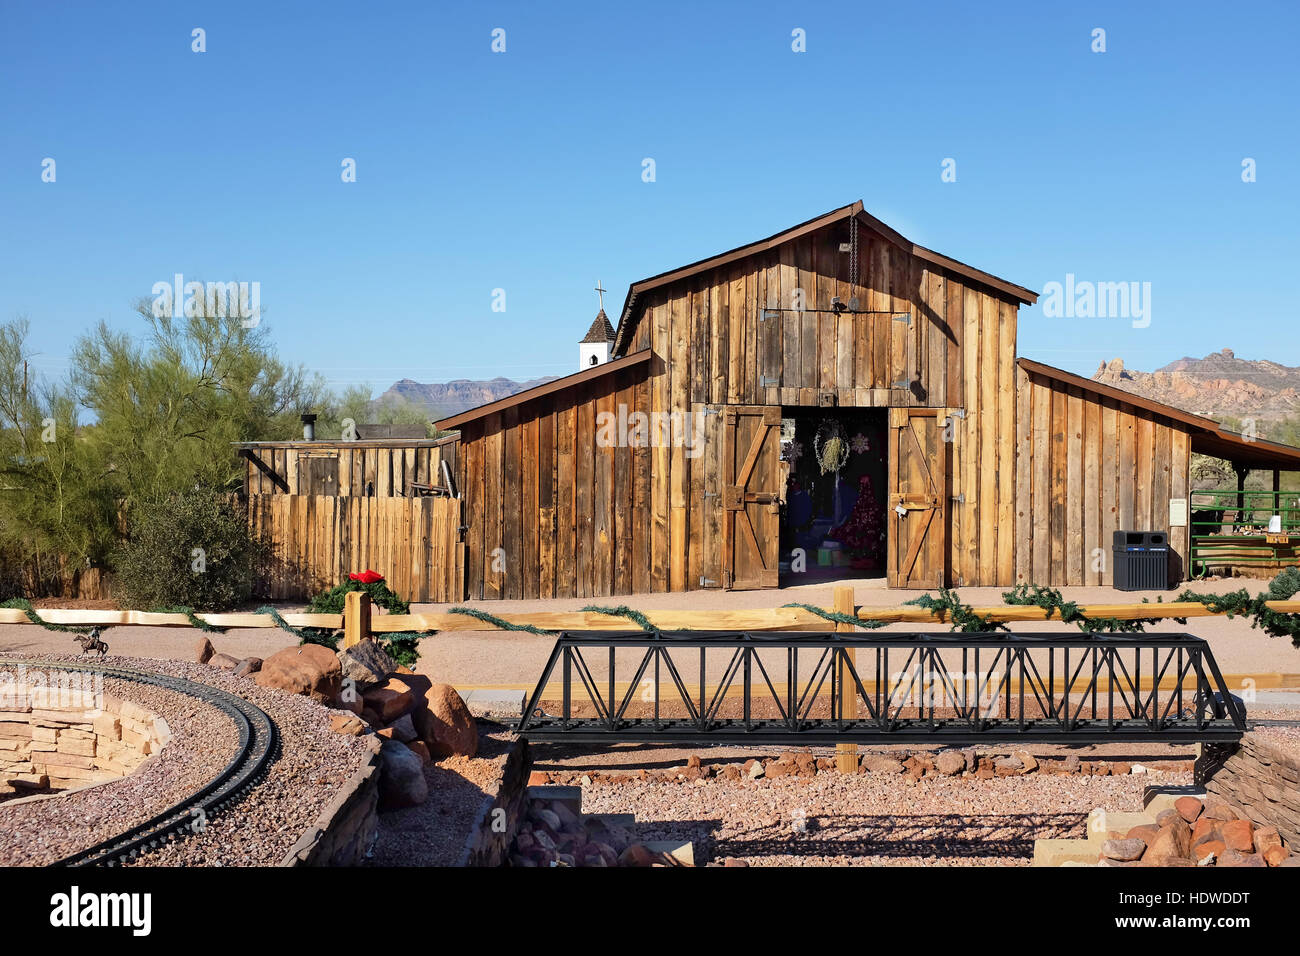 Apacheland Barn and Model Railroad trestle with the Elvis Memorial Chapel in the background at the Superstition Mountain Museum in Apache Junction, Ar Stock Photo